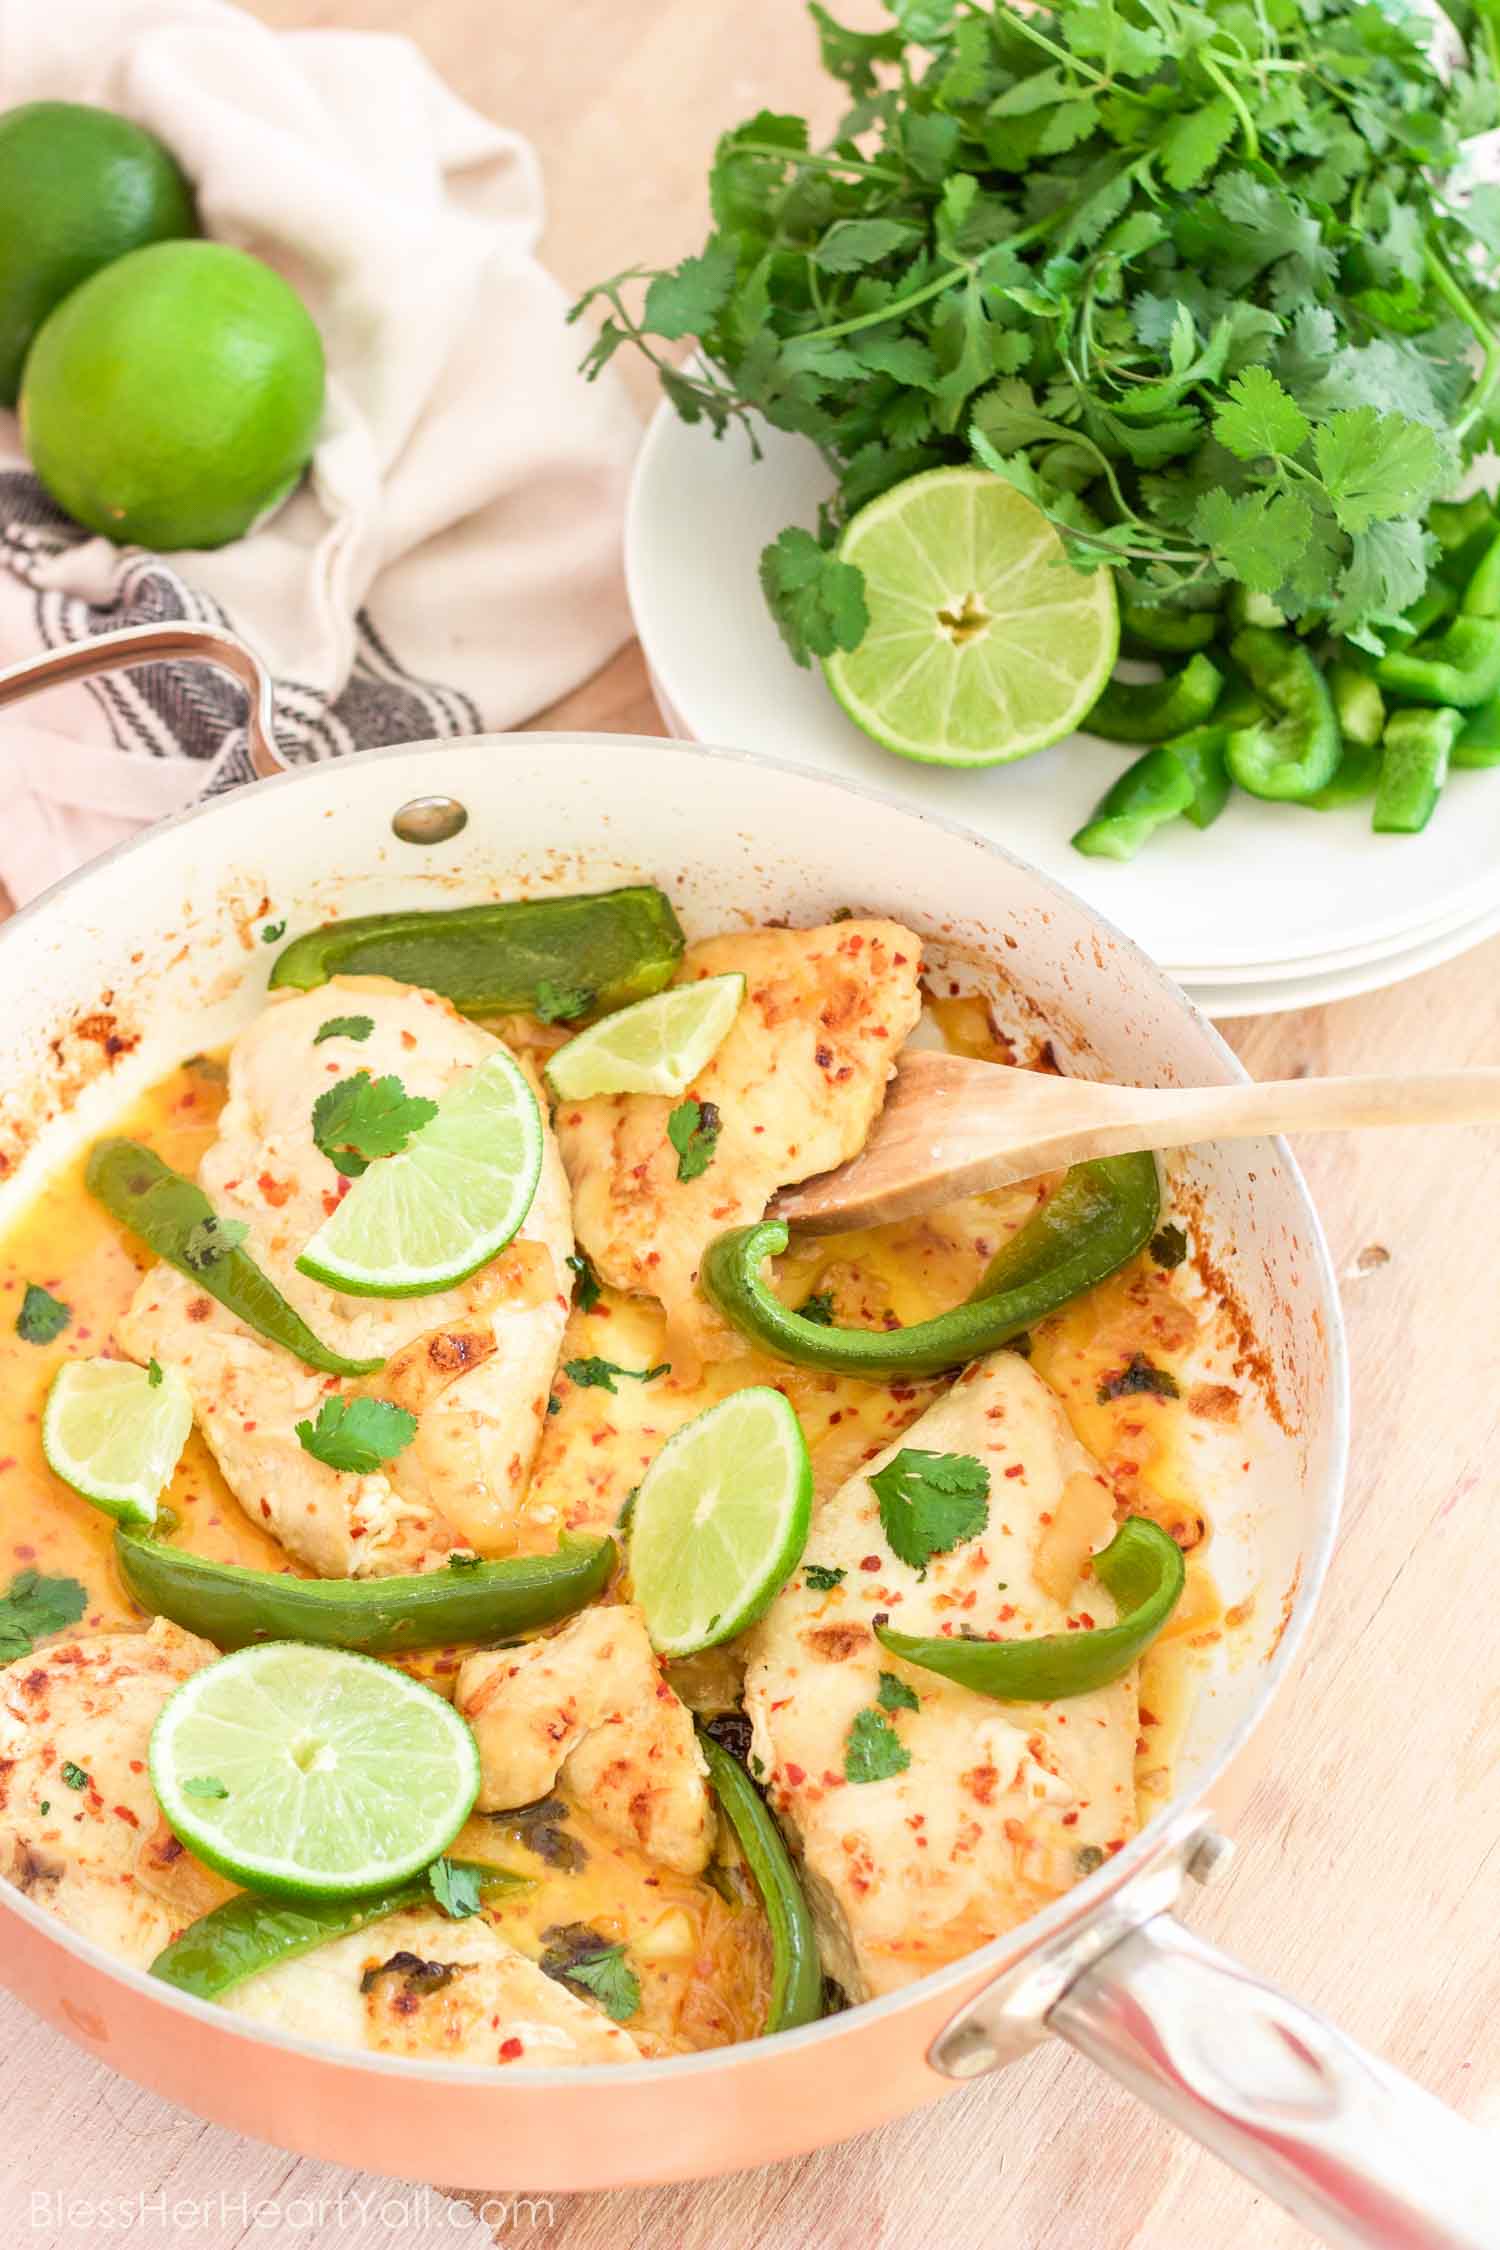 This gluten-free creamy cilantro lime chicken recipe combines the fresh flavors of cilantro, lime, and coconut, with the juiciness of baked chicken and veggies, perfect for warm weather! Your taste buds will think they were on a tropical island!